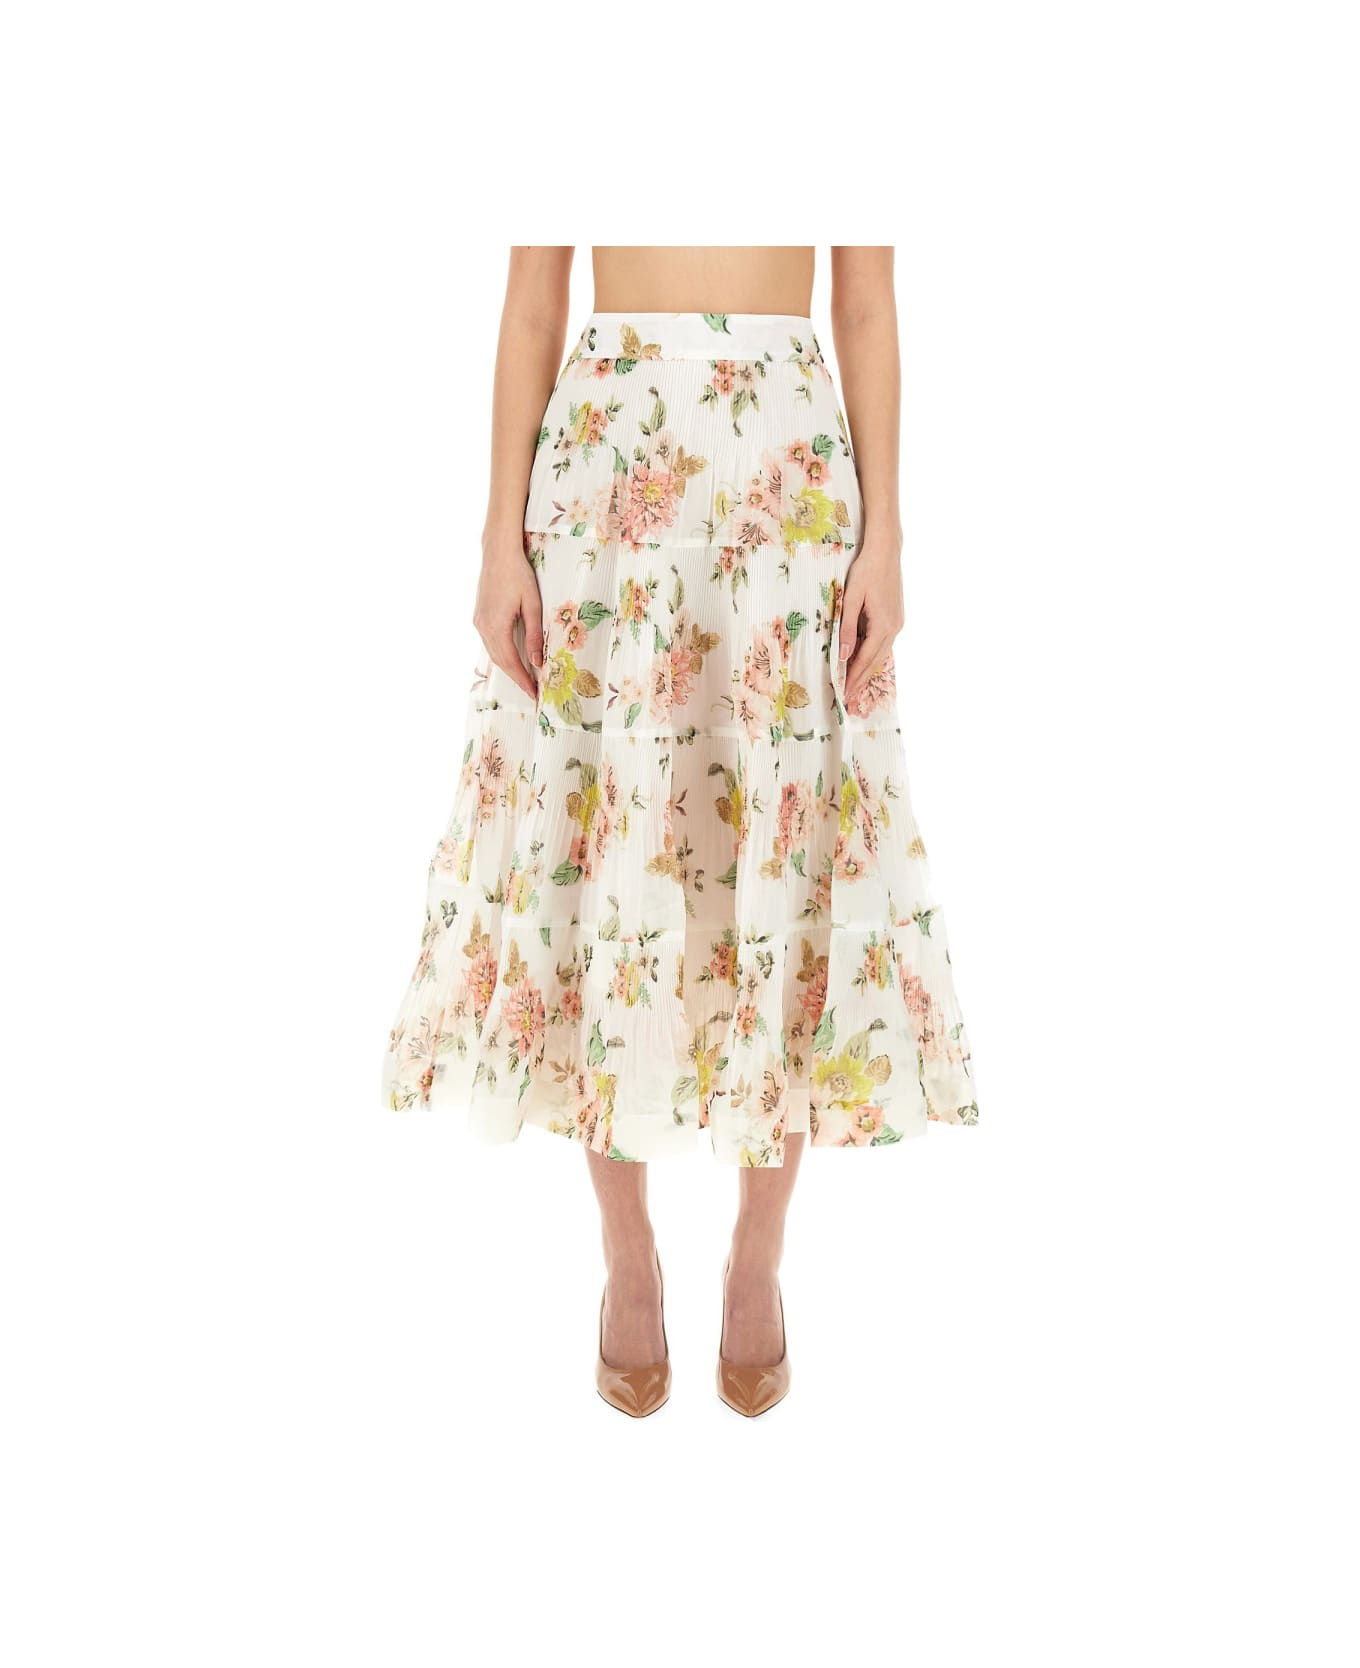 Zimmermann Skirt With Floral Pattern - PINK